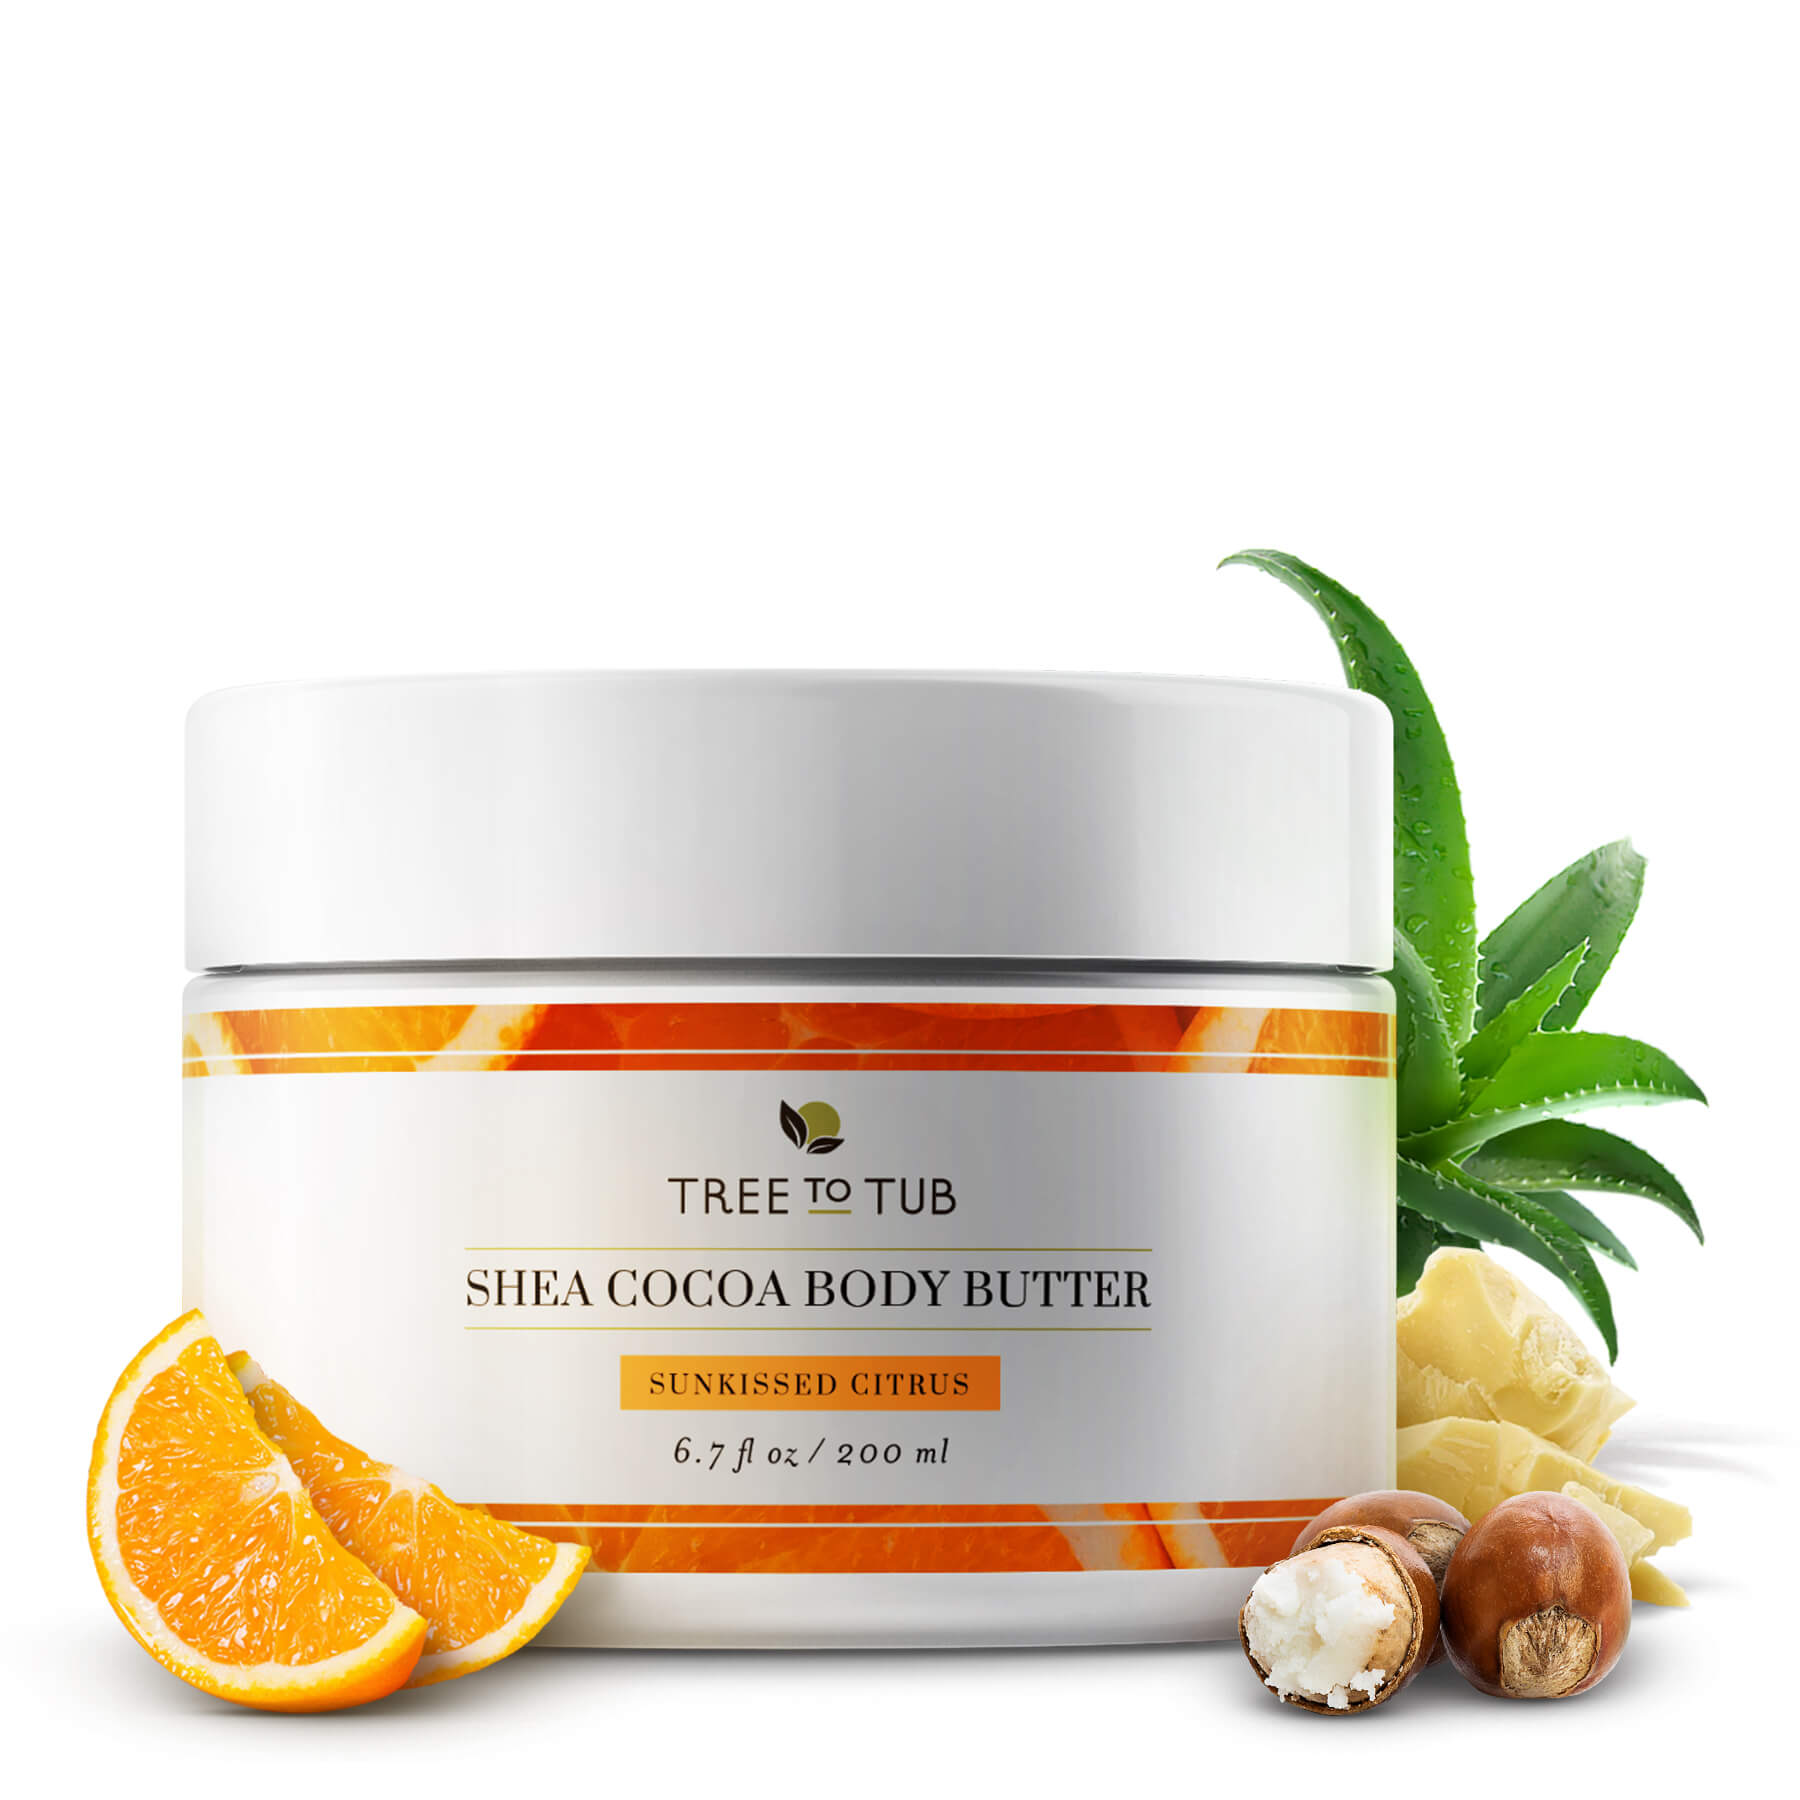 Tree To Tub Shea Cocoa Body Butter